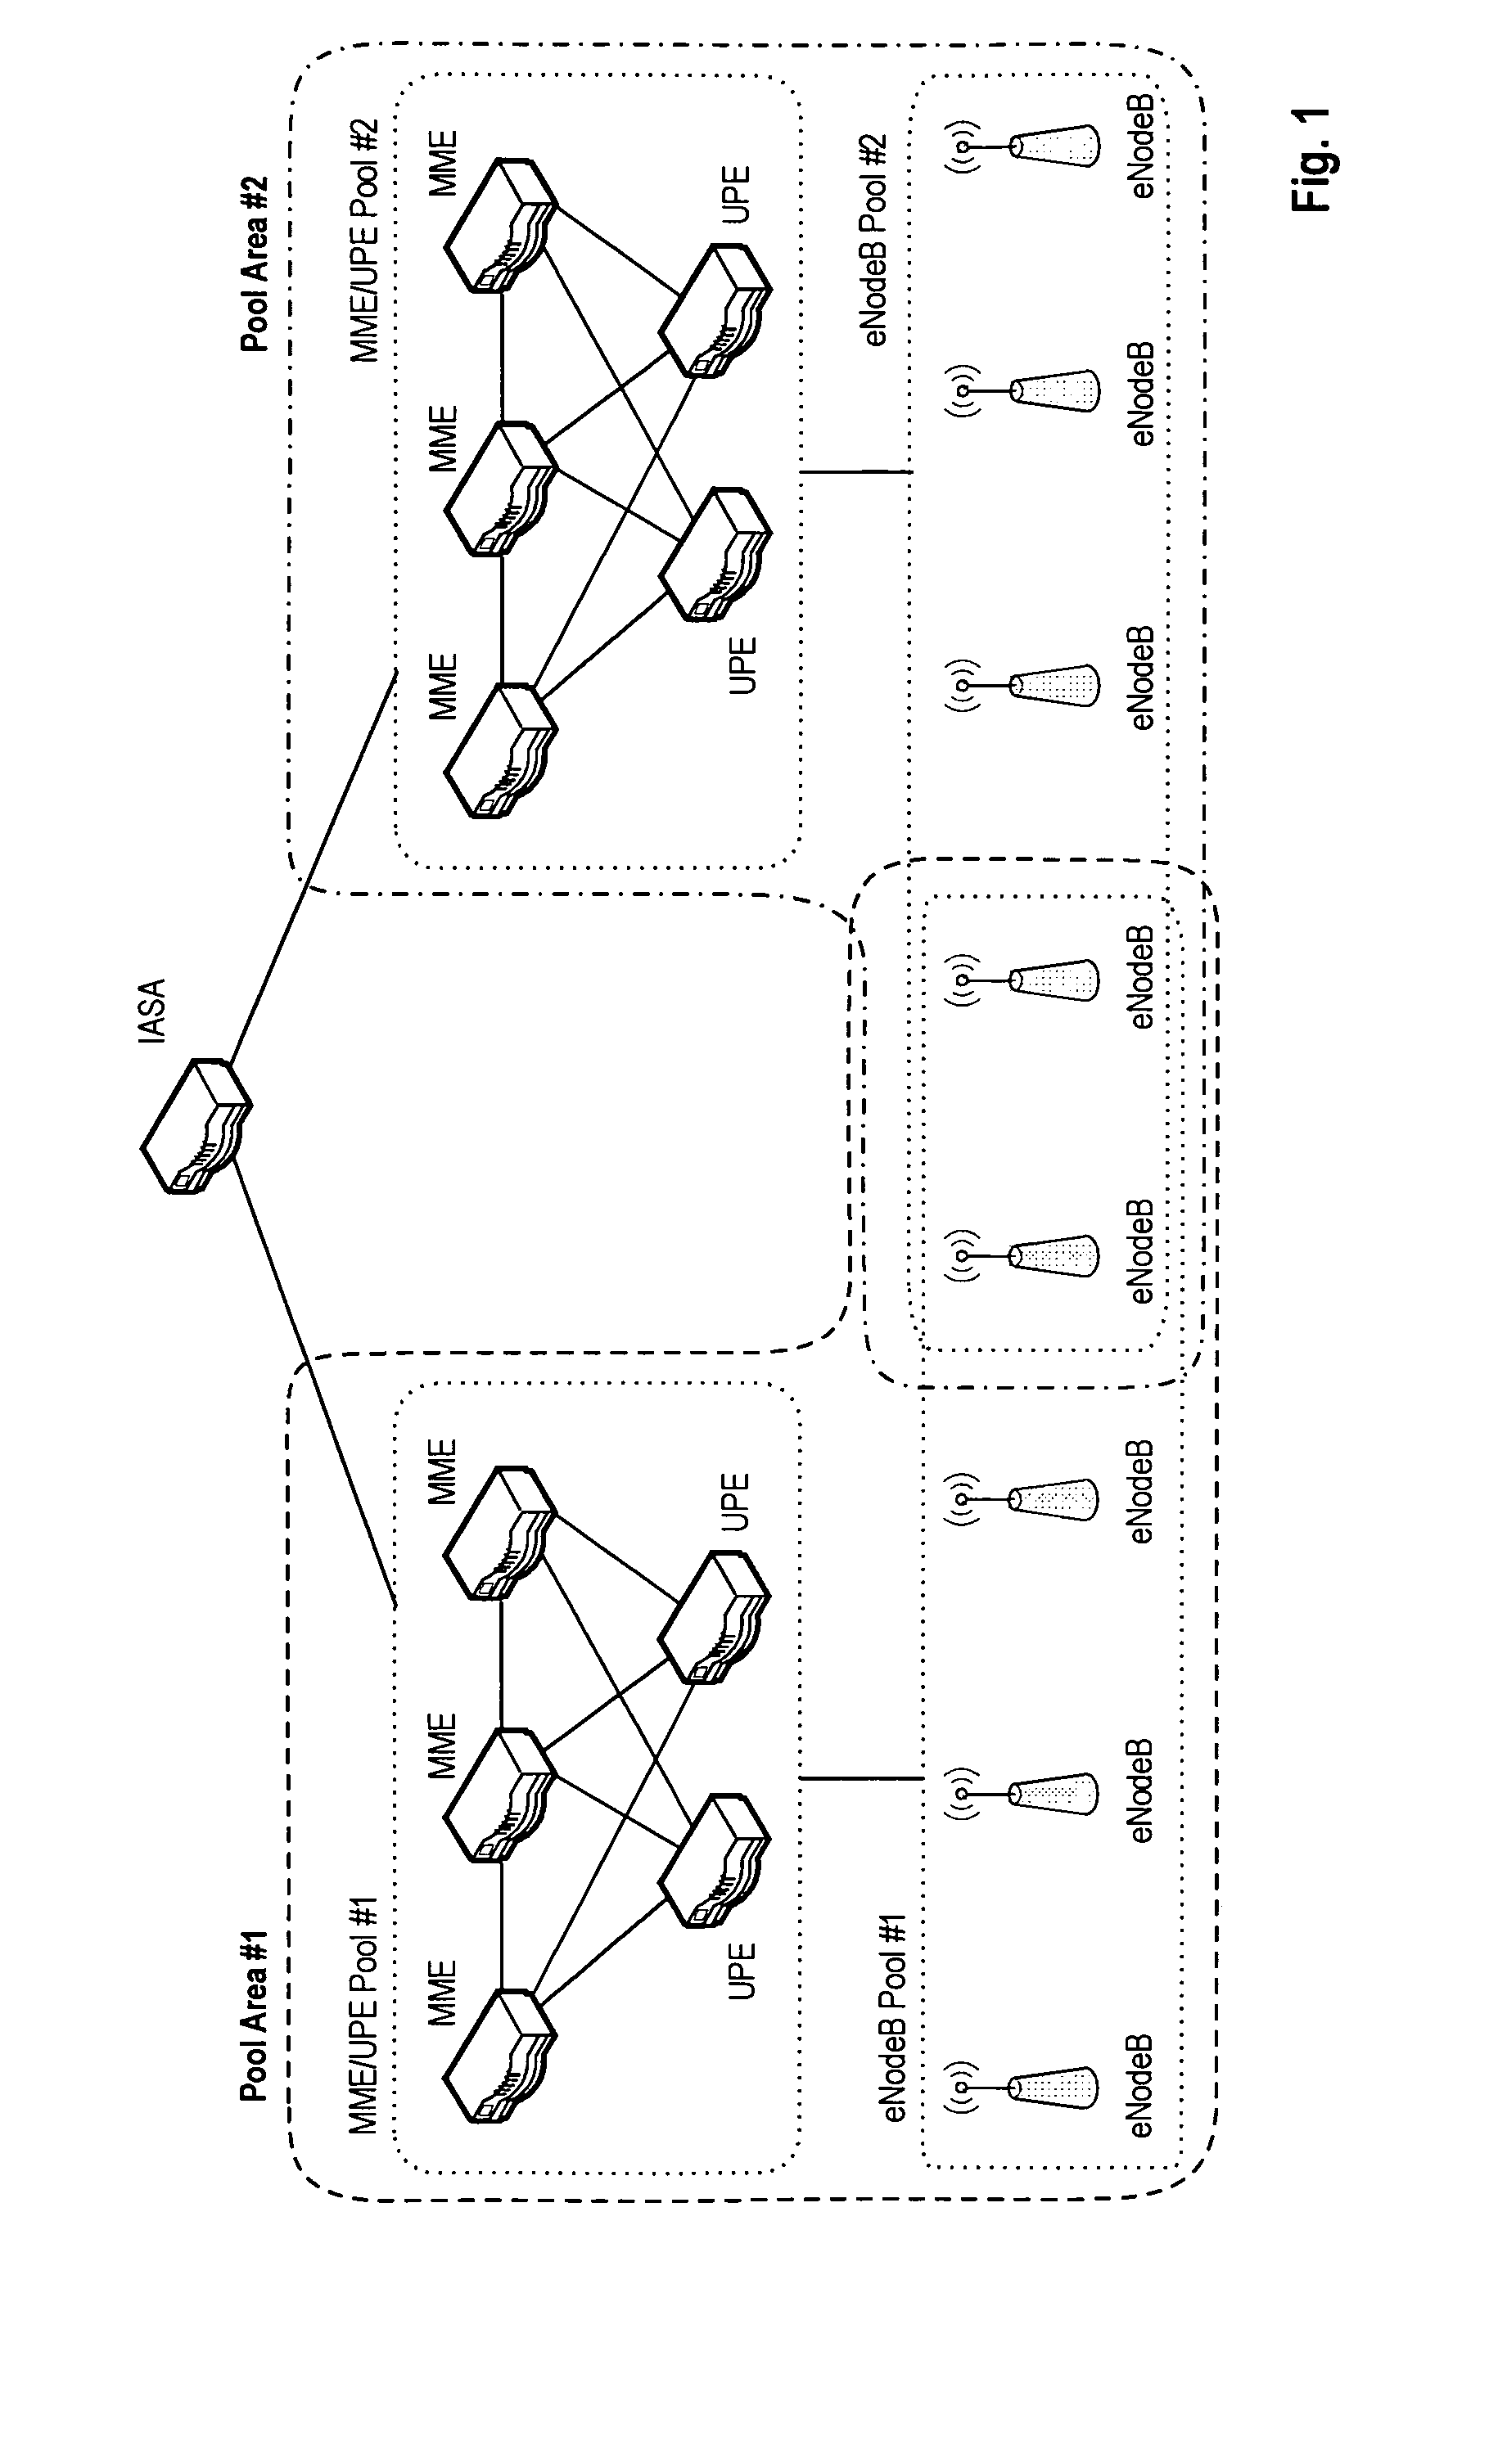 Multicast service provision in a mobile communication system having overlapping pool areas